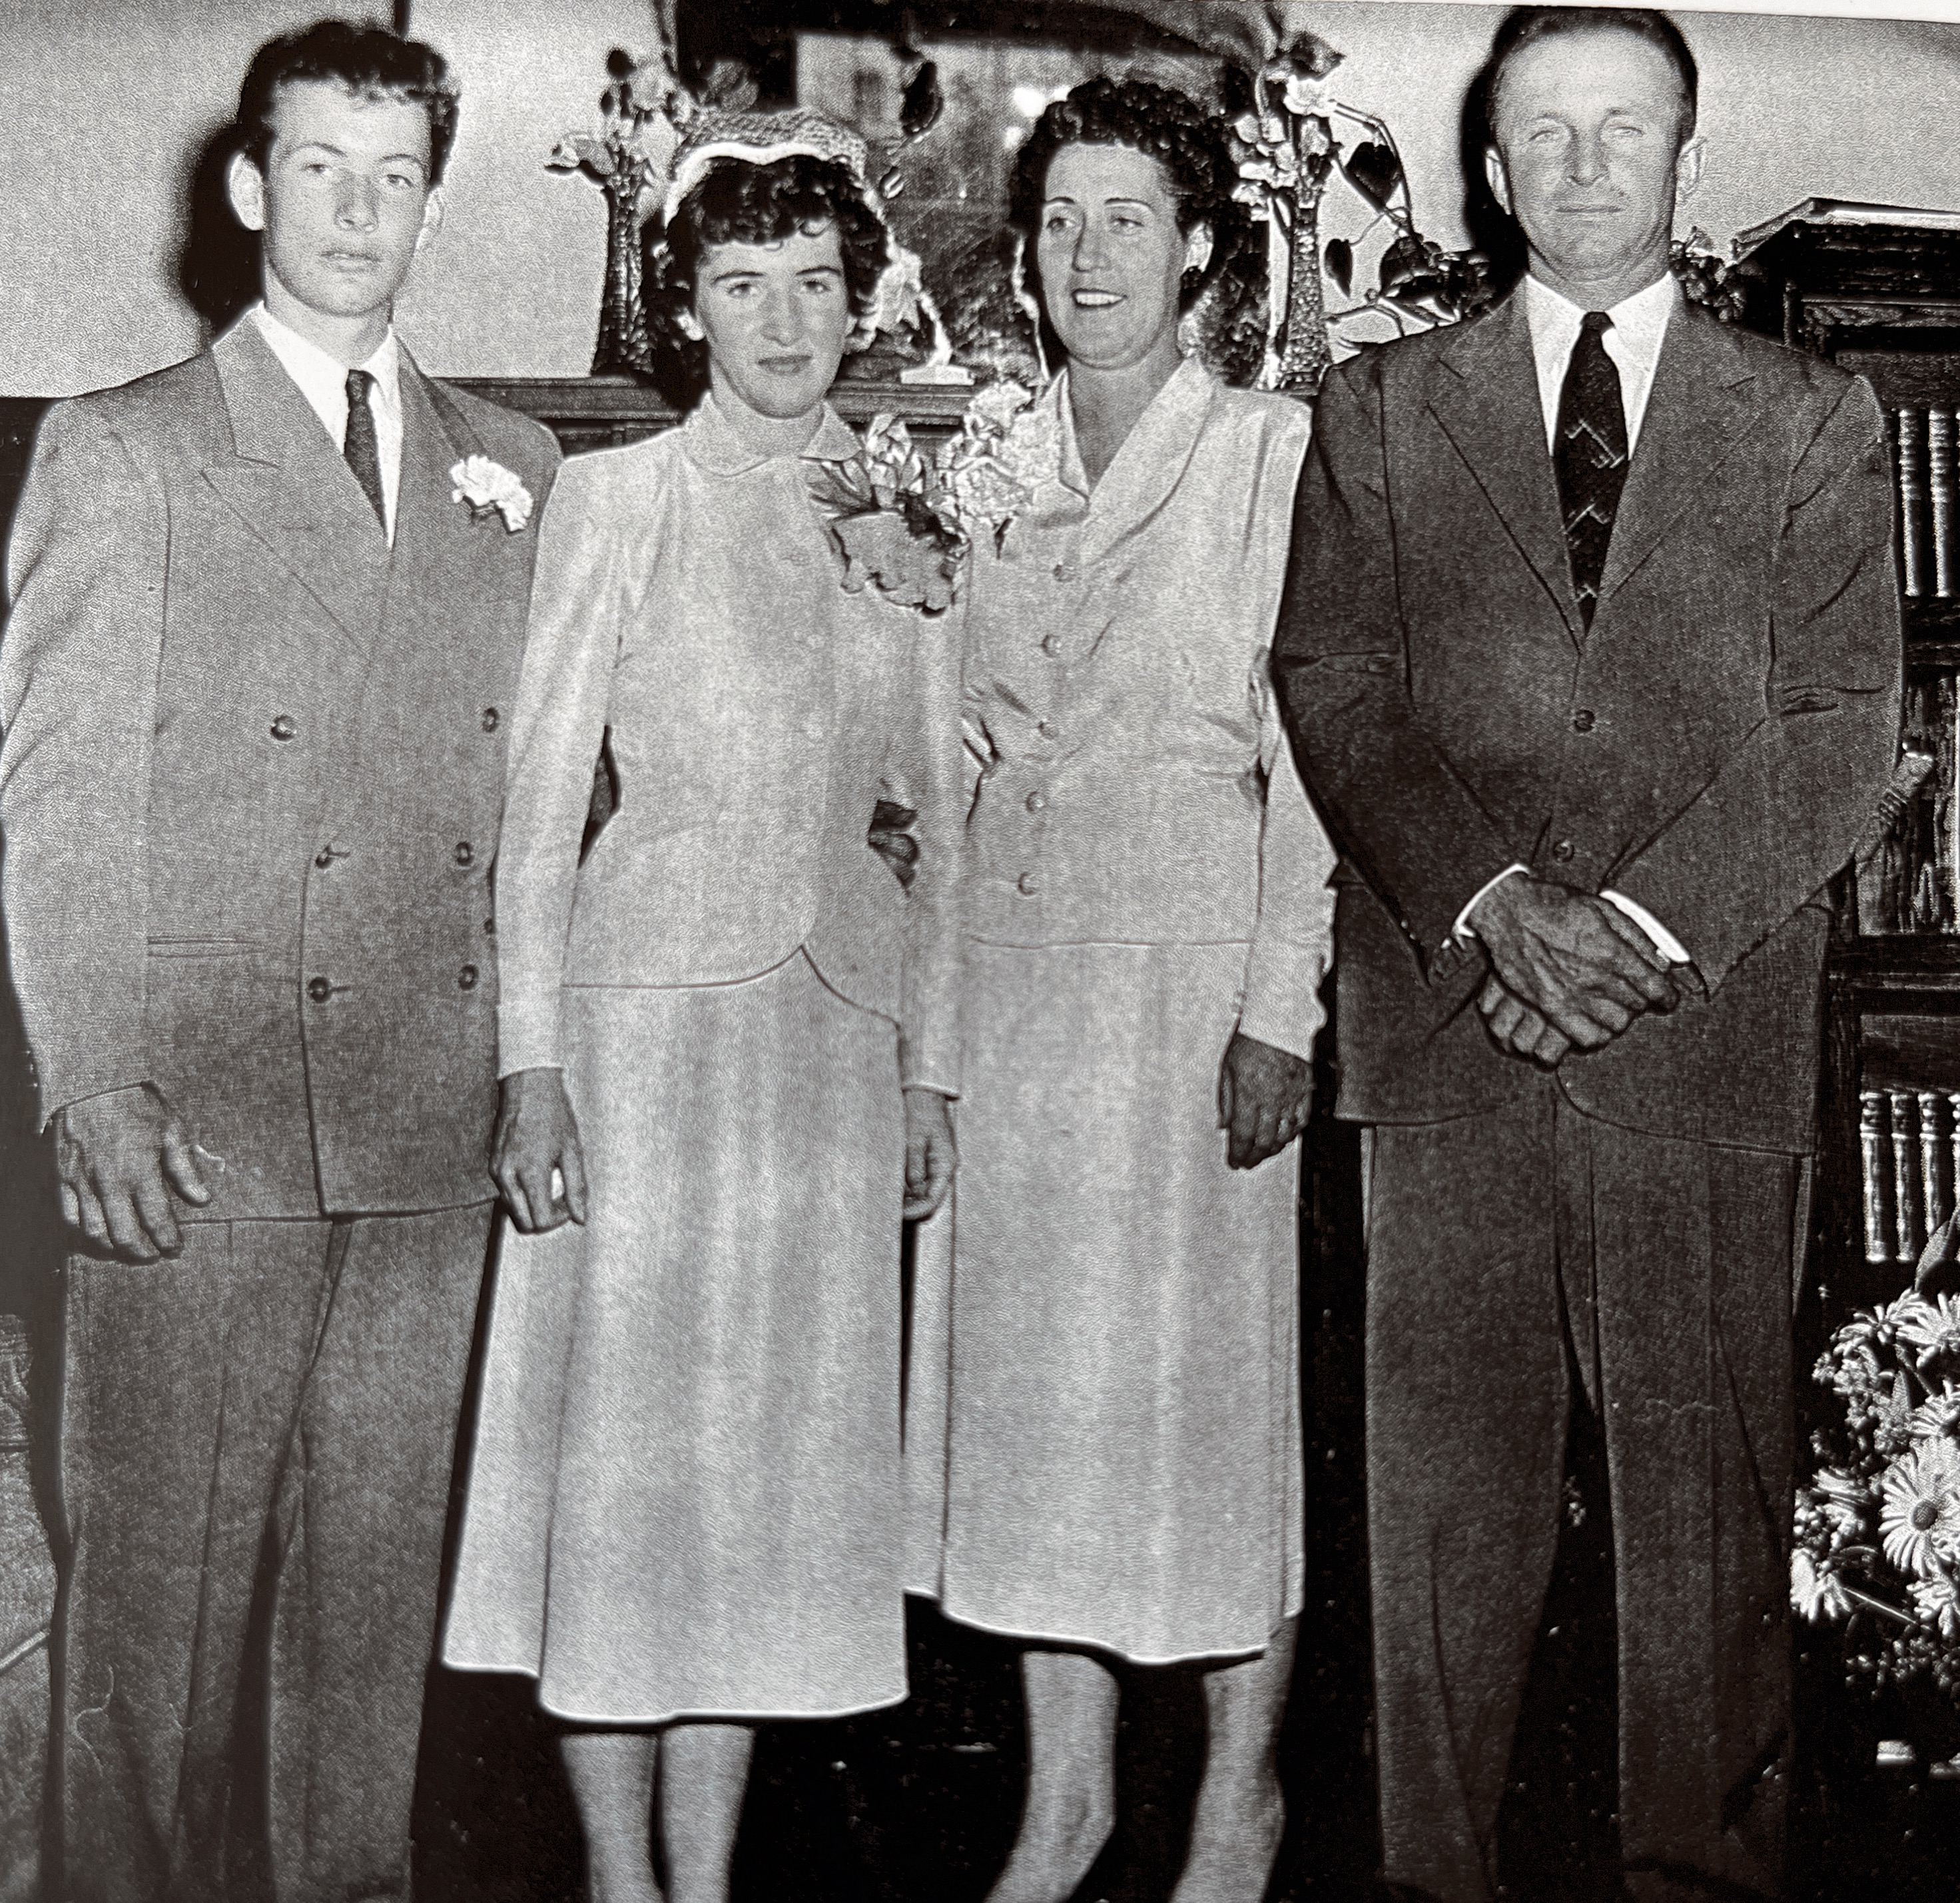 Brent Hall, Kaye Robinson wedding day with Kaye’s parents, Ruth Robinson and Rex Robinson. July 23, 1954 at the Robinson home in Lava Hot Springs.